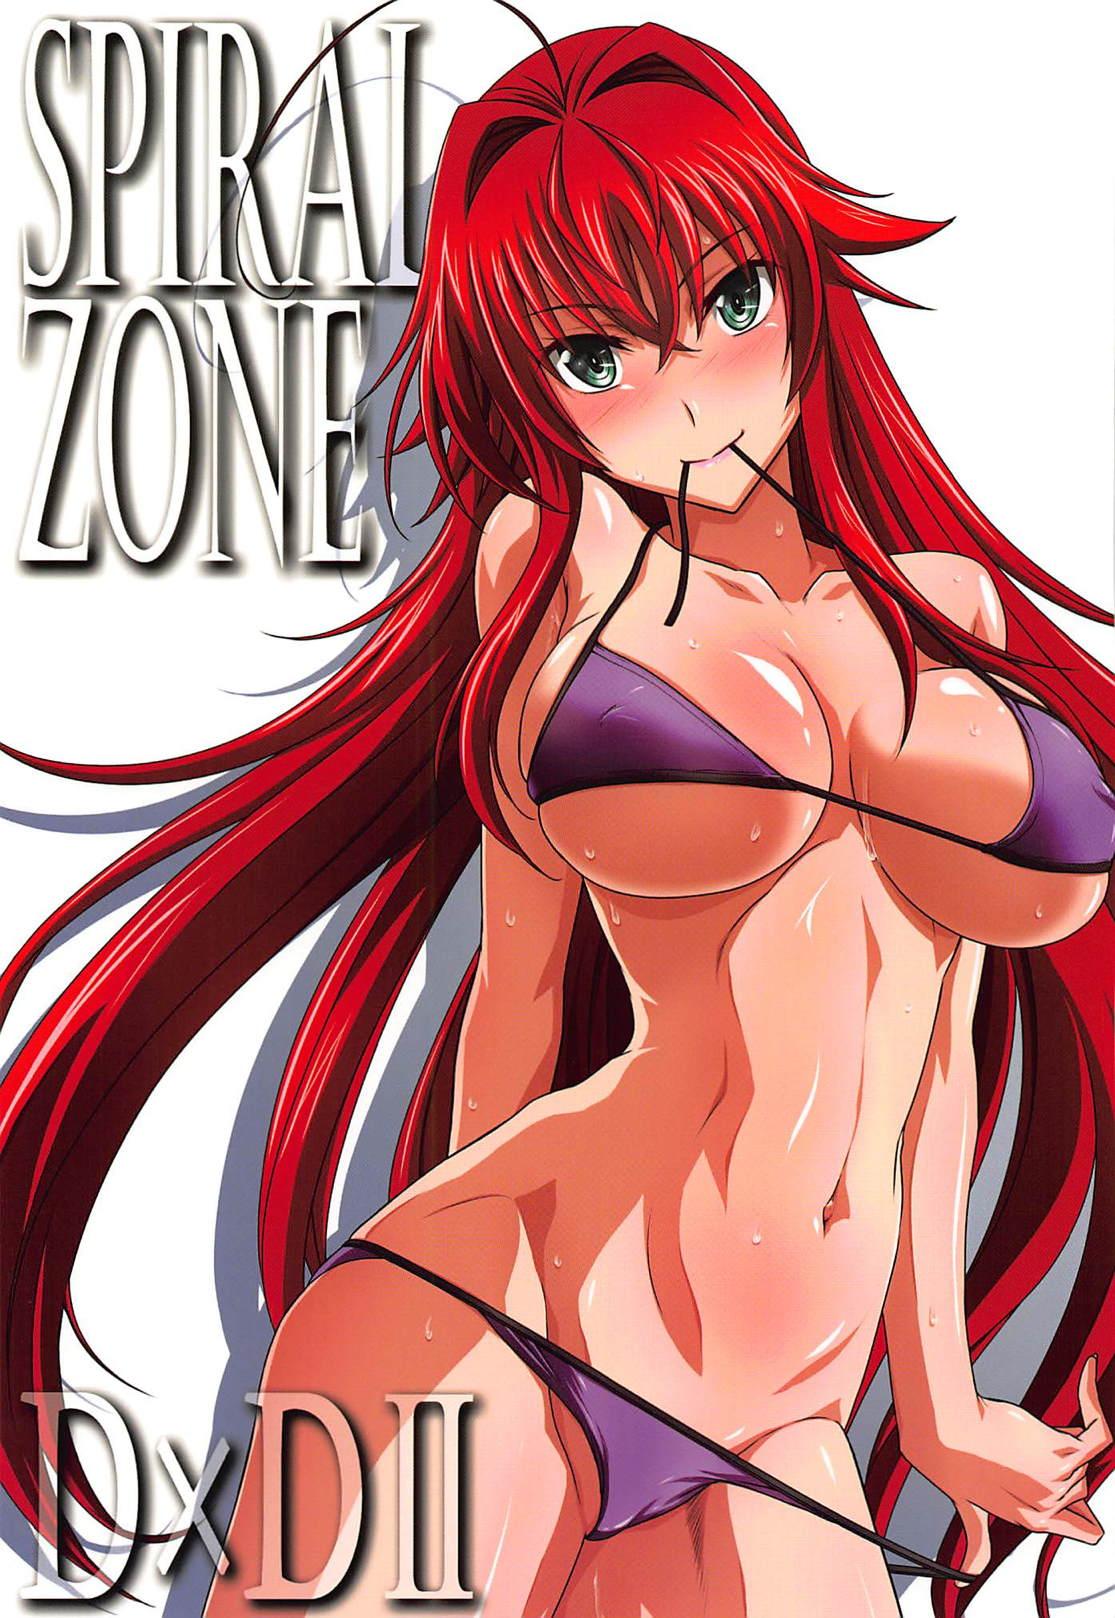 Bigcock SPIRAL ZONE DxD II - Highschool dxd Hot Girl Pussy - Picture 1